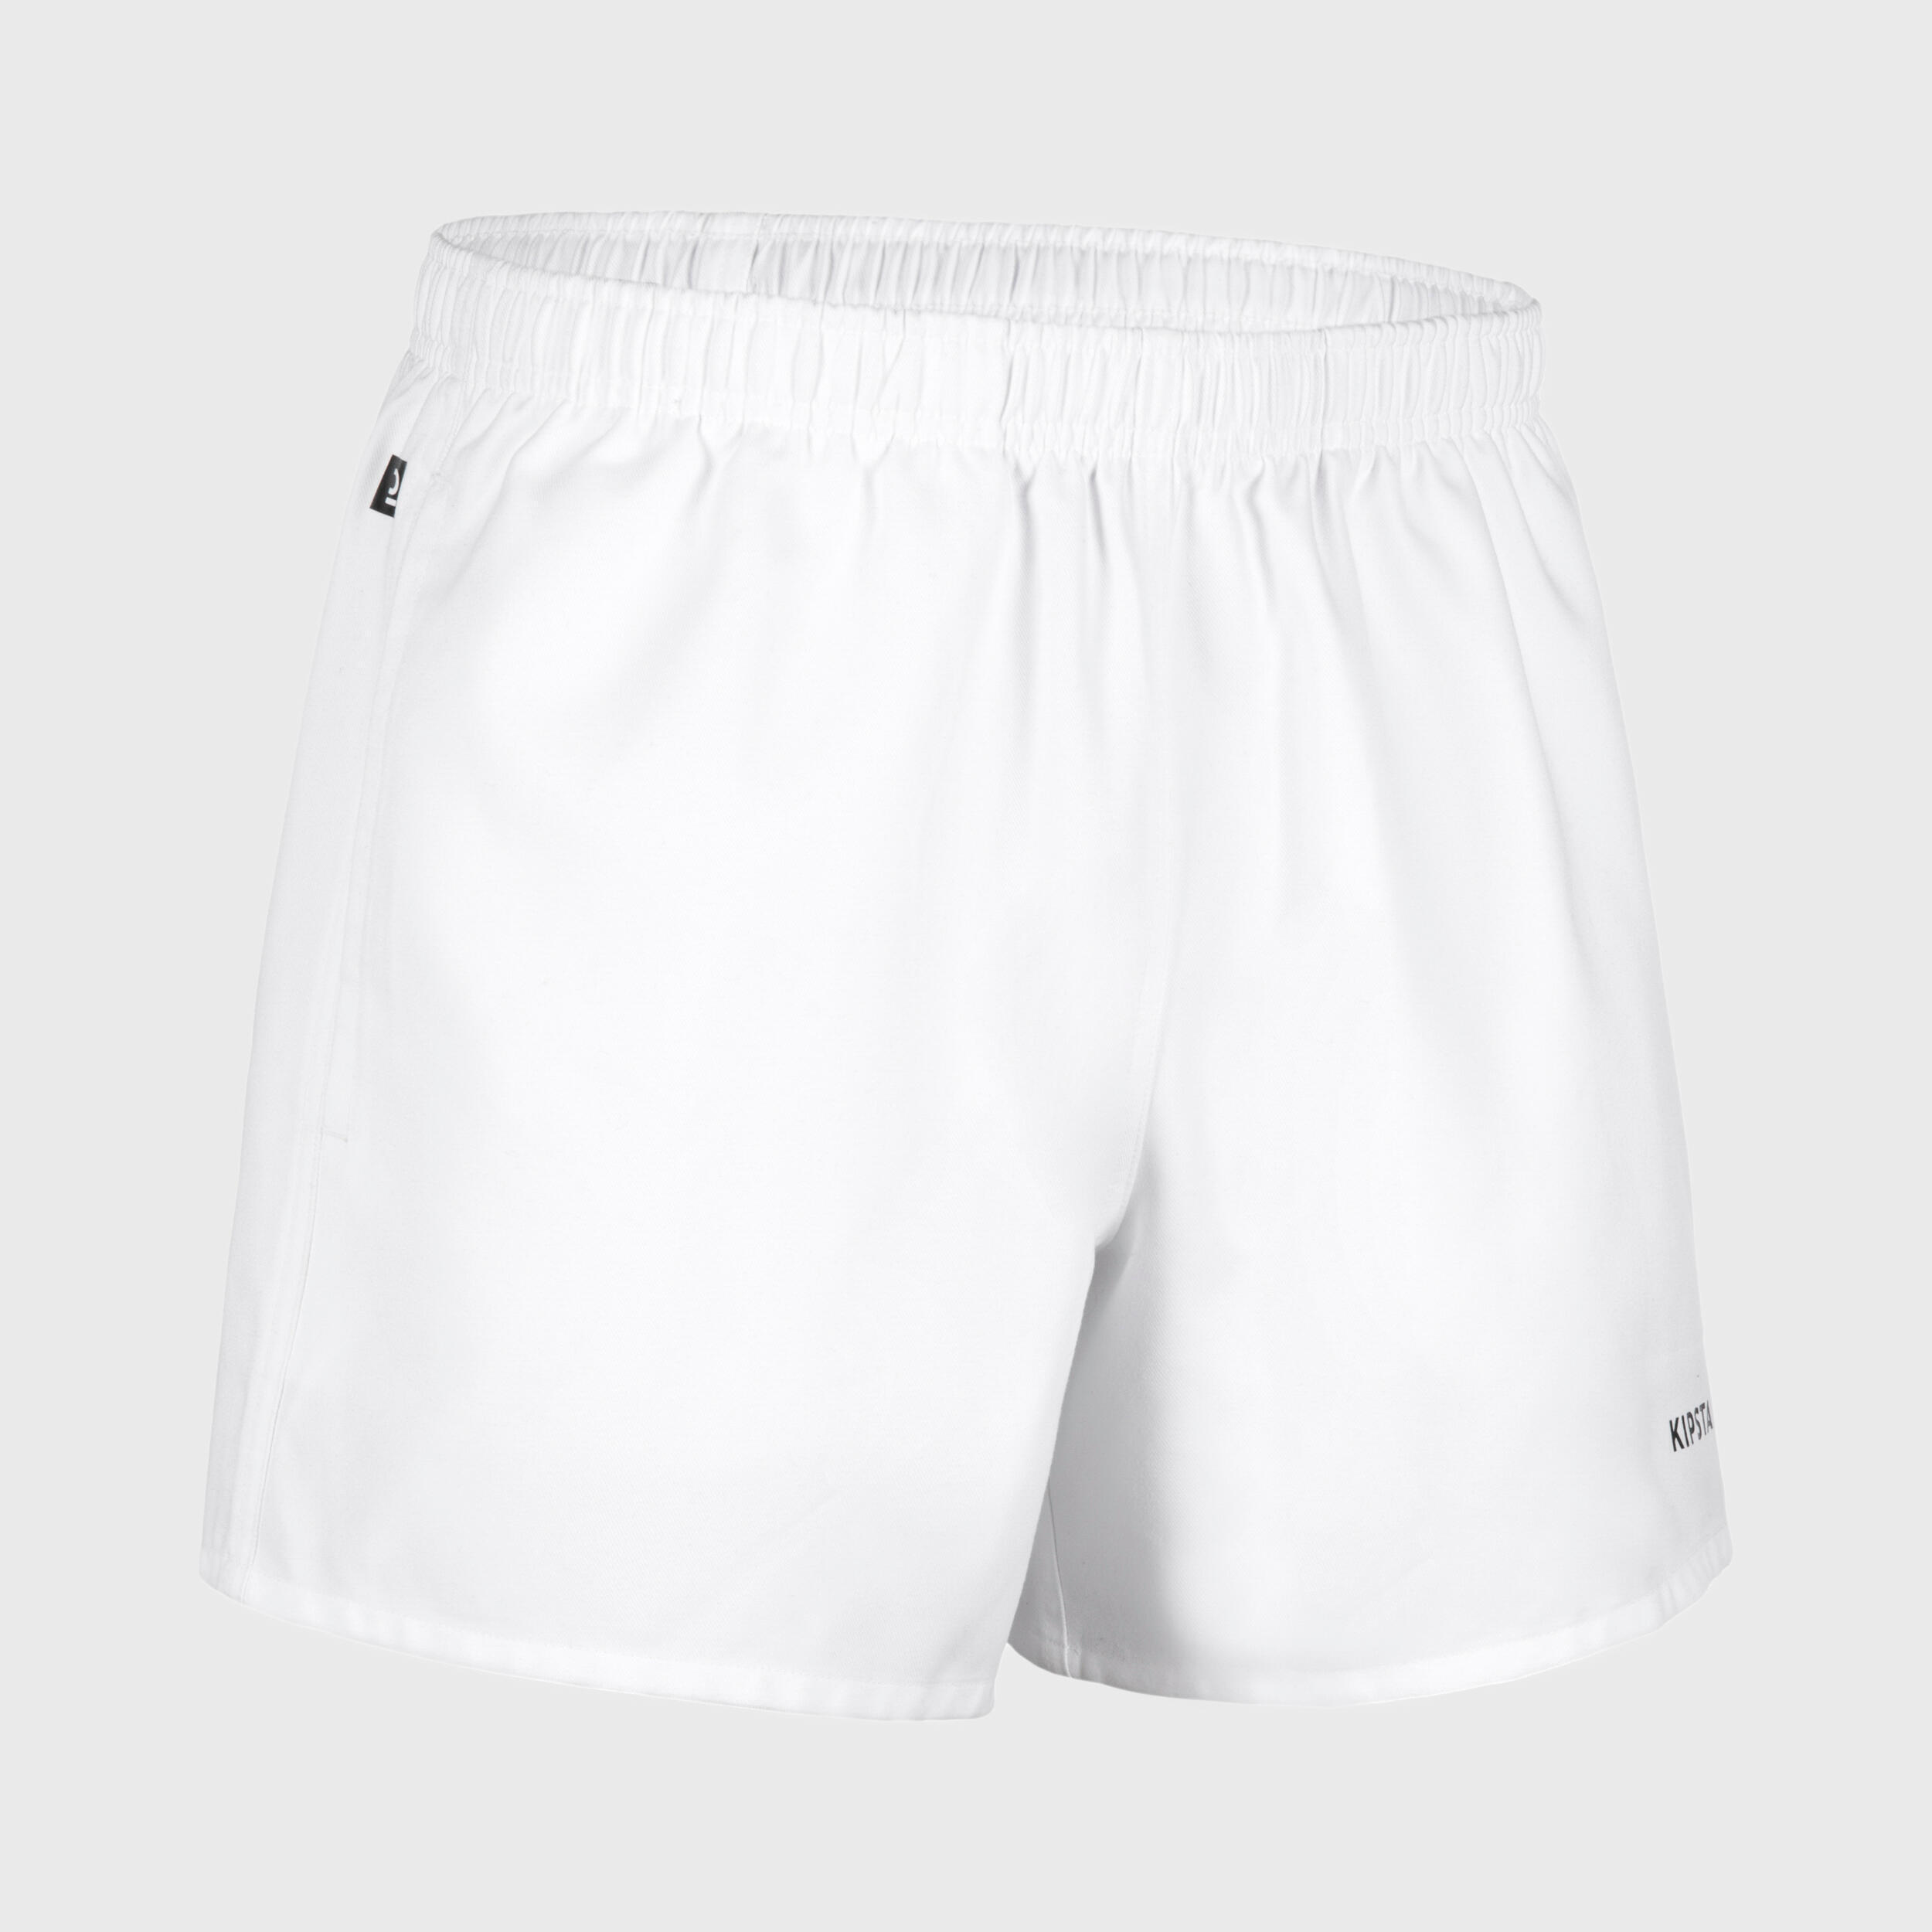 Refurbished Adult Rugby Shorts with Pockets R100 - B Grade 1/7